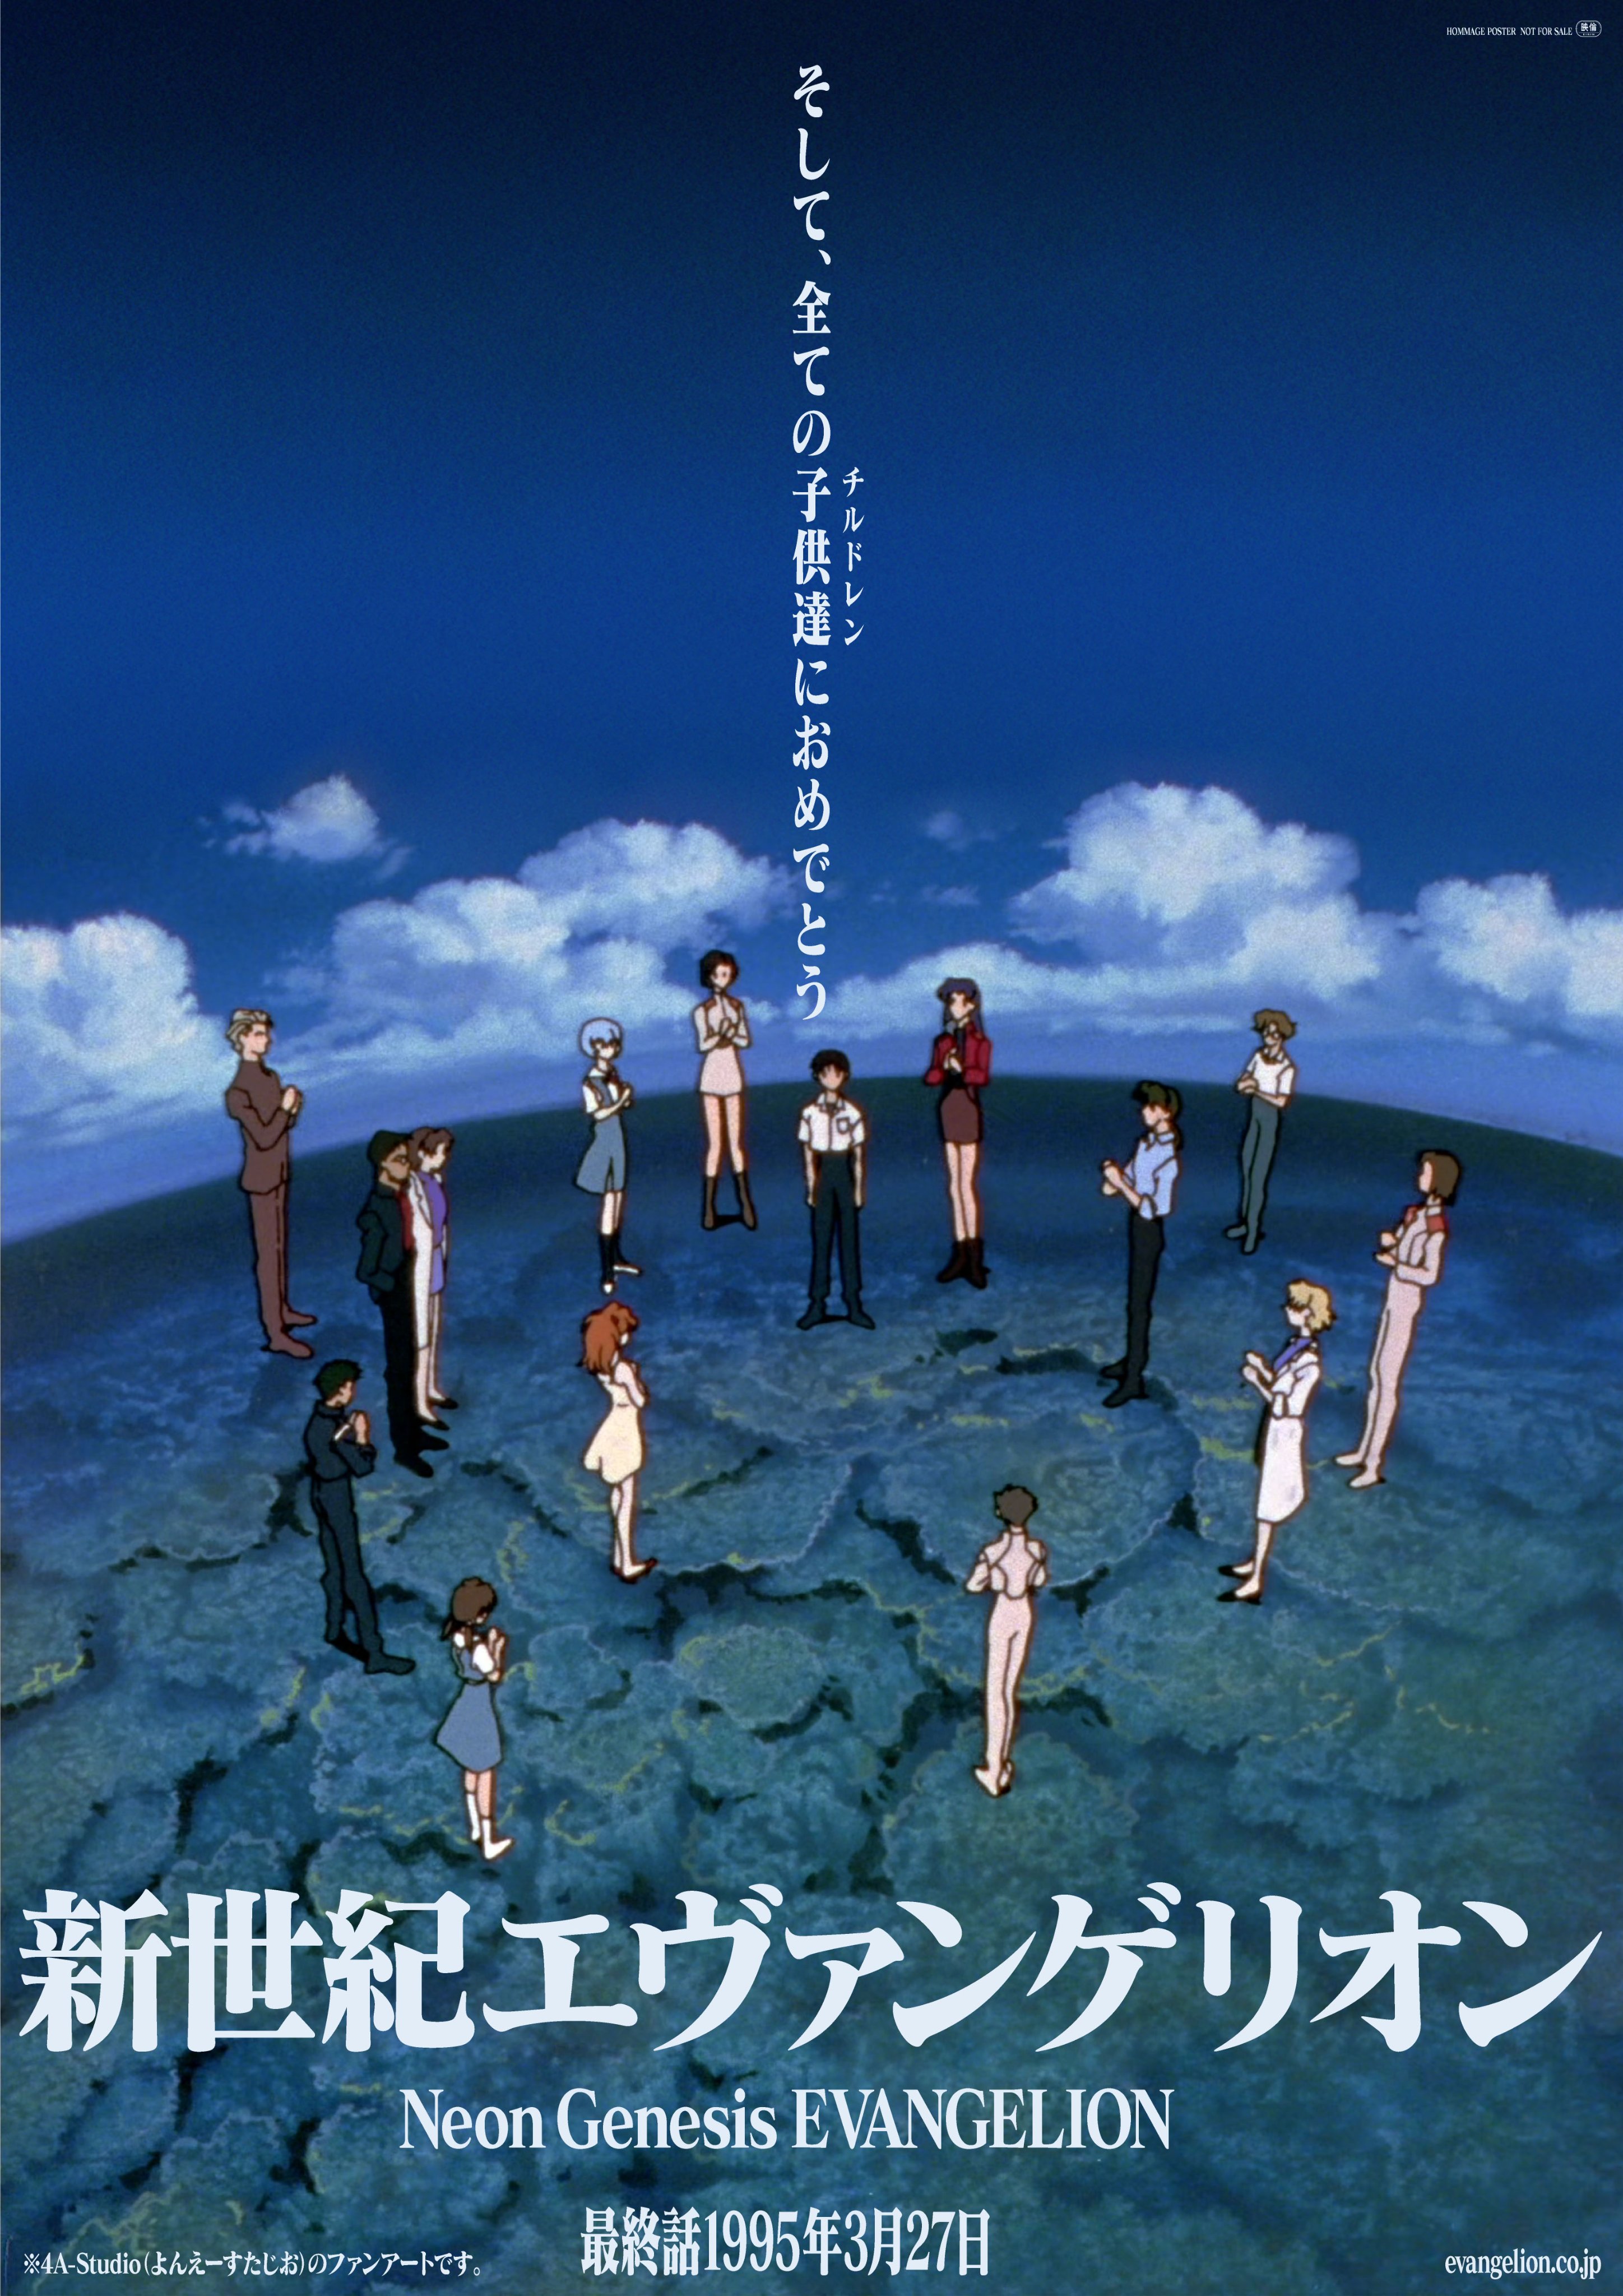 Tguenther 4a Studio Com Huh The Earth That They All Seem To Be Standing Or Floating Over Reminds Me Of The Scab Coral From Eureka Seven Twitter